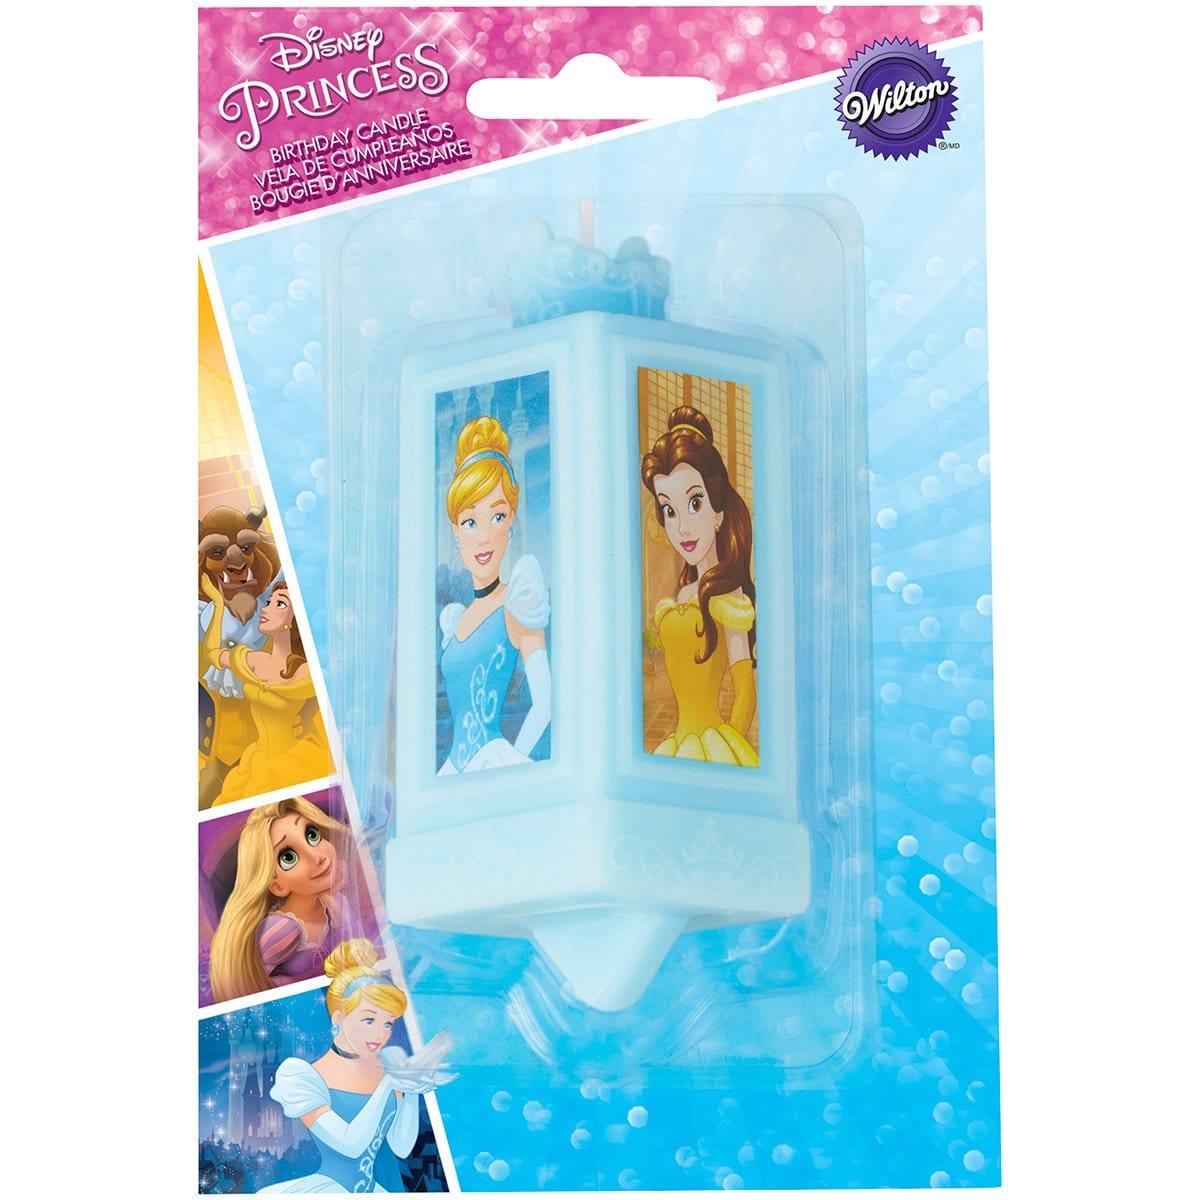 Buy Kids Birthday Disney Princesses candle sold at Party Expert